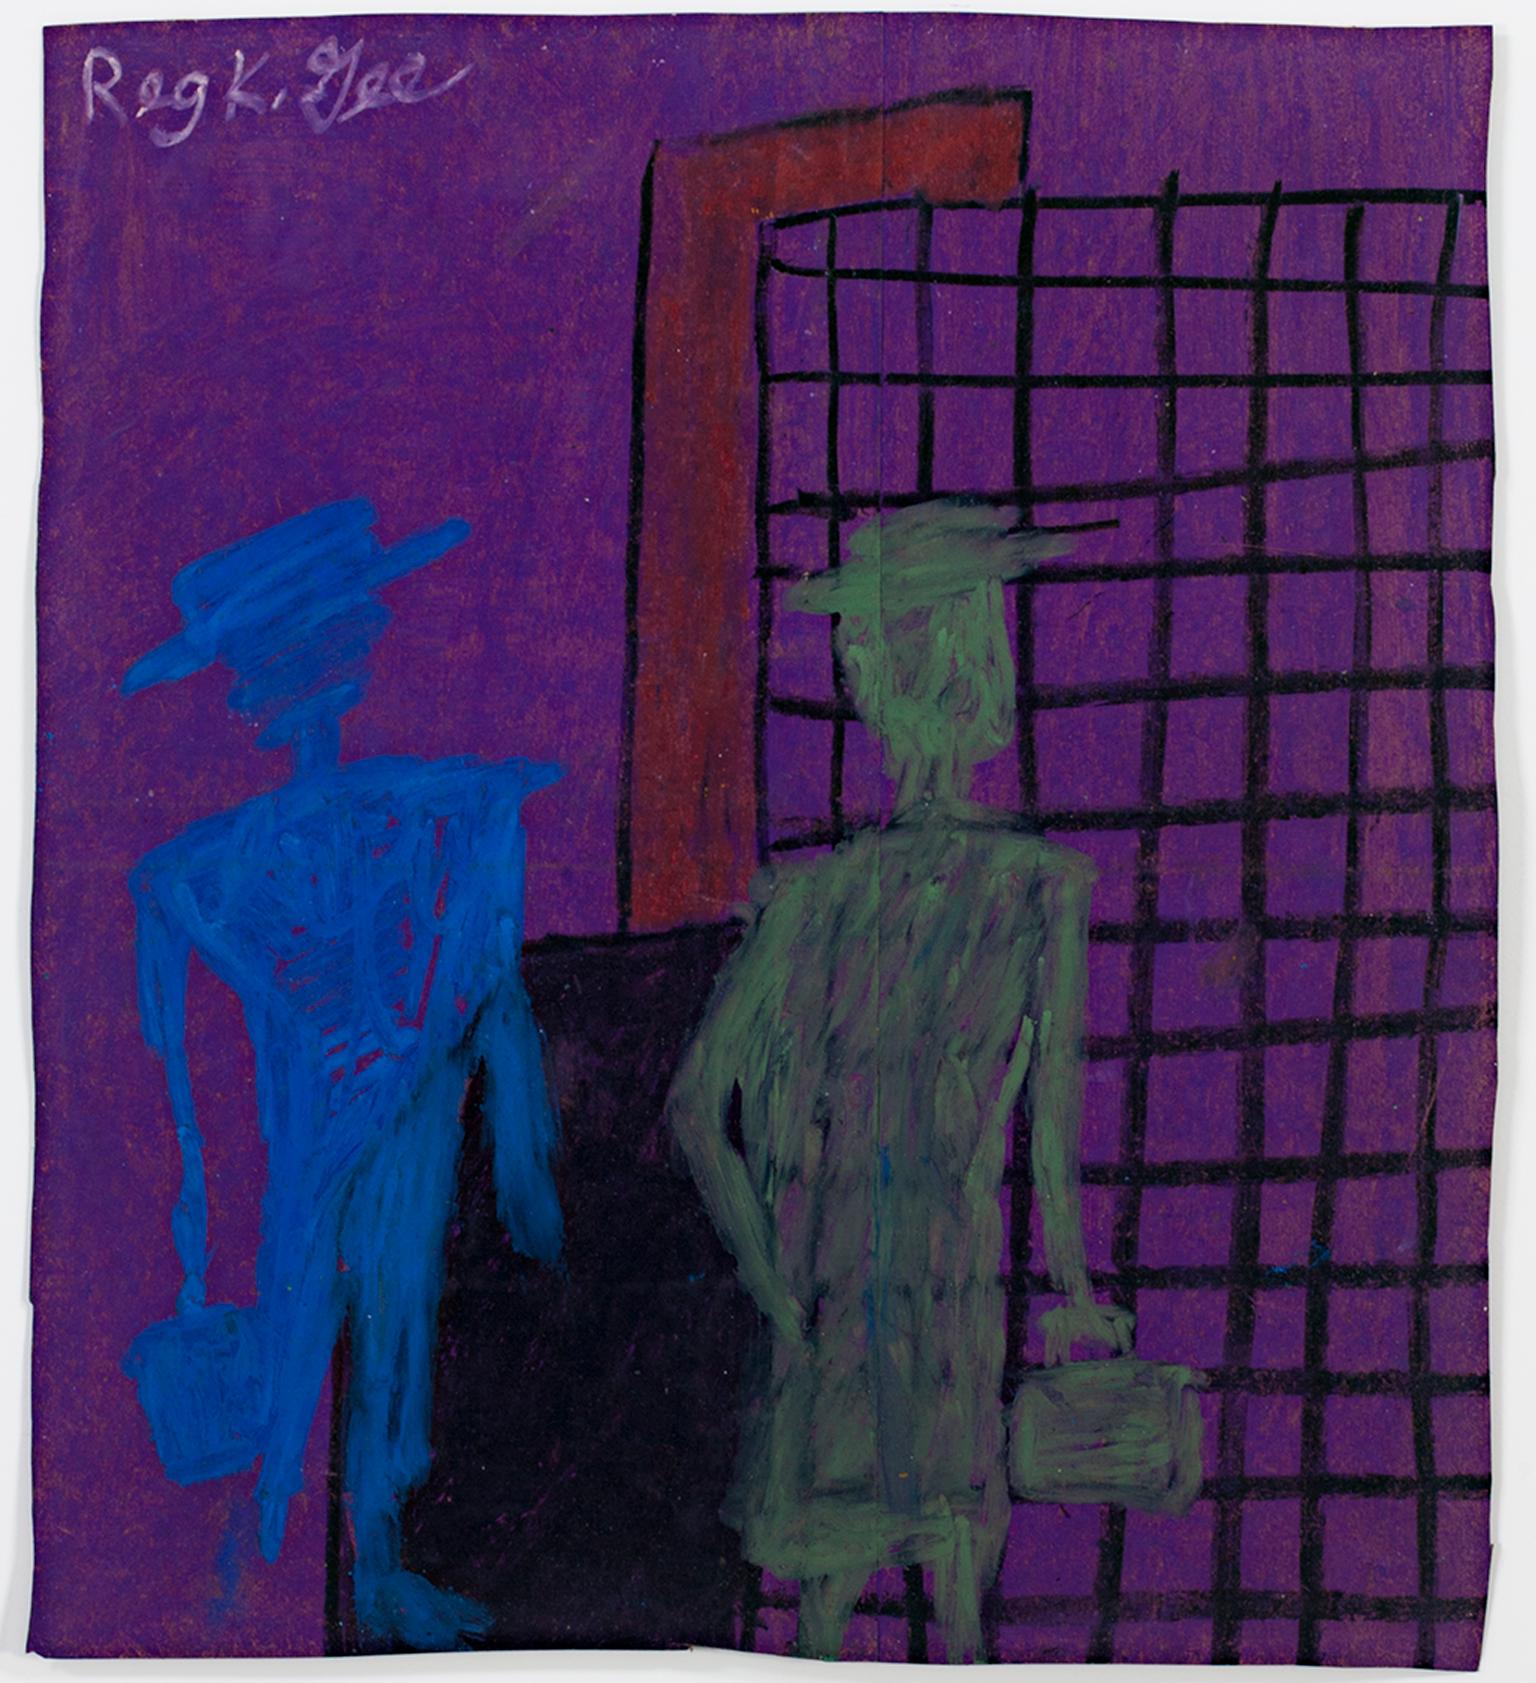 "Two Citizens" is an original oil pastel drawing on a grocery bag by Reginald K. Gee. The artist signed the piece upper left.  Gee engages a variety of themes in his work, including the everyday, humor, social commentary, and art itself. For